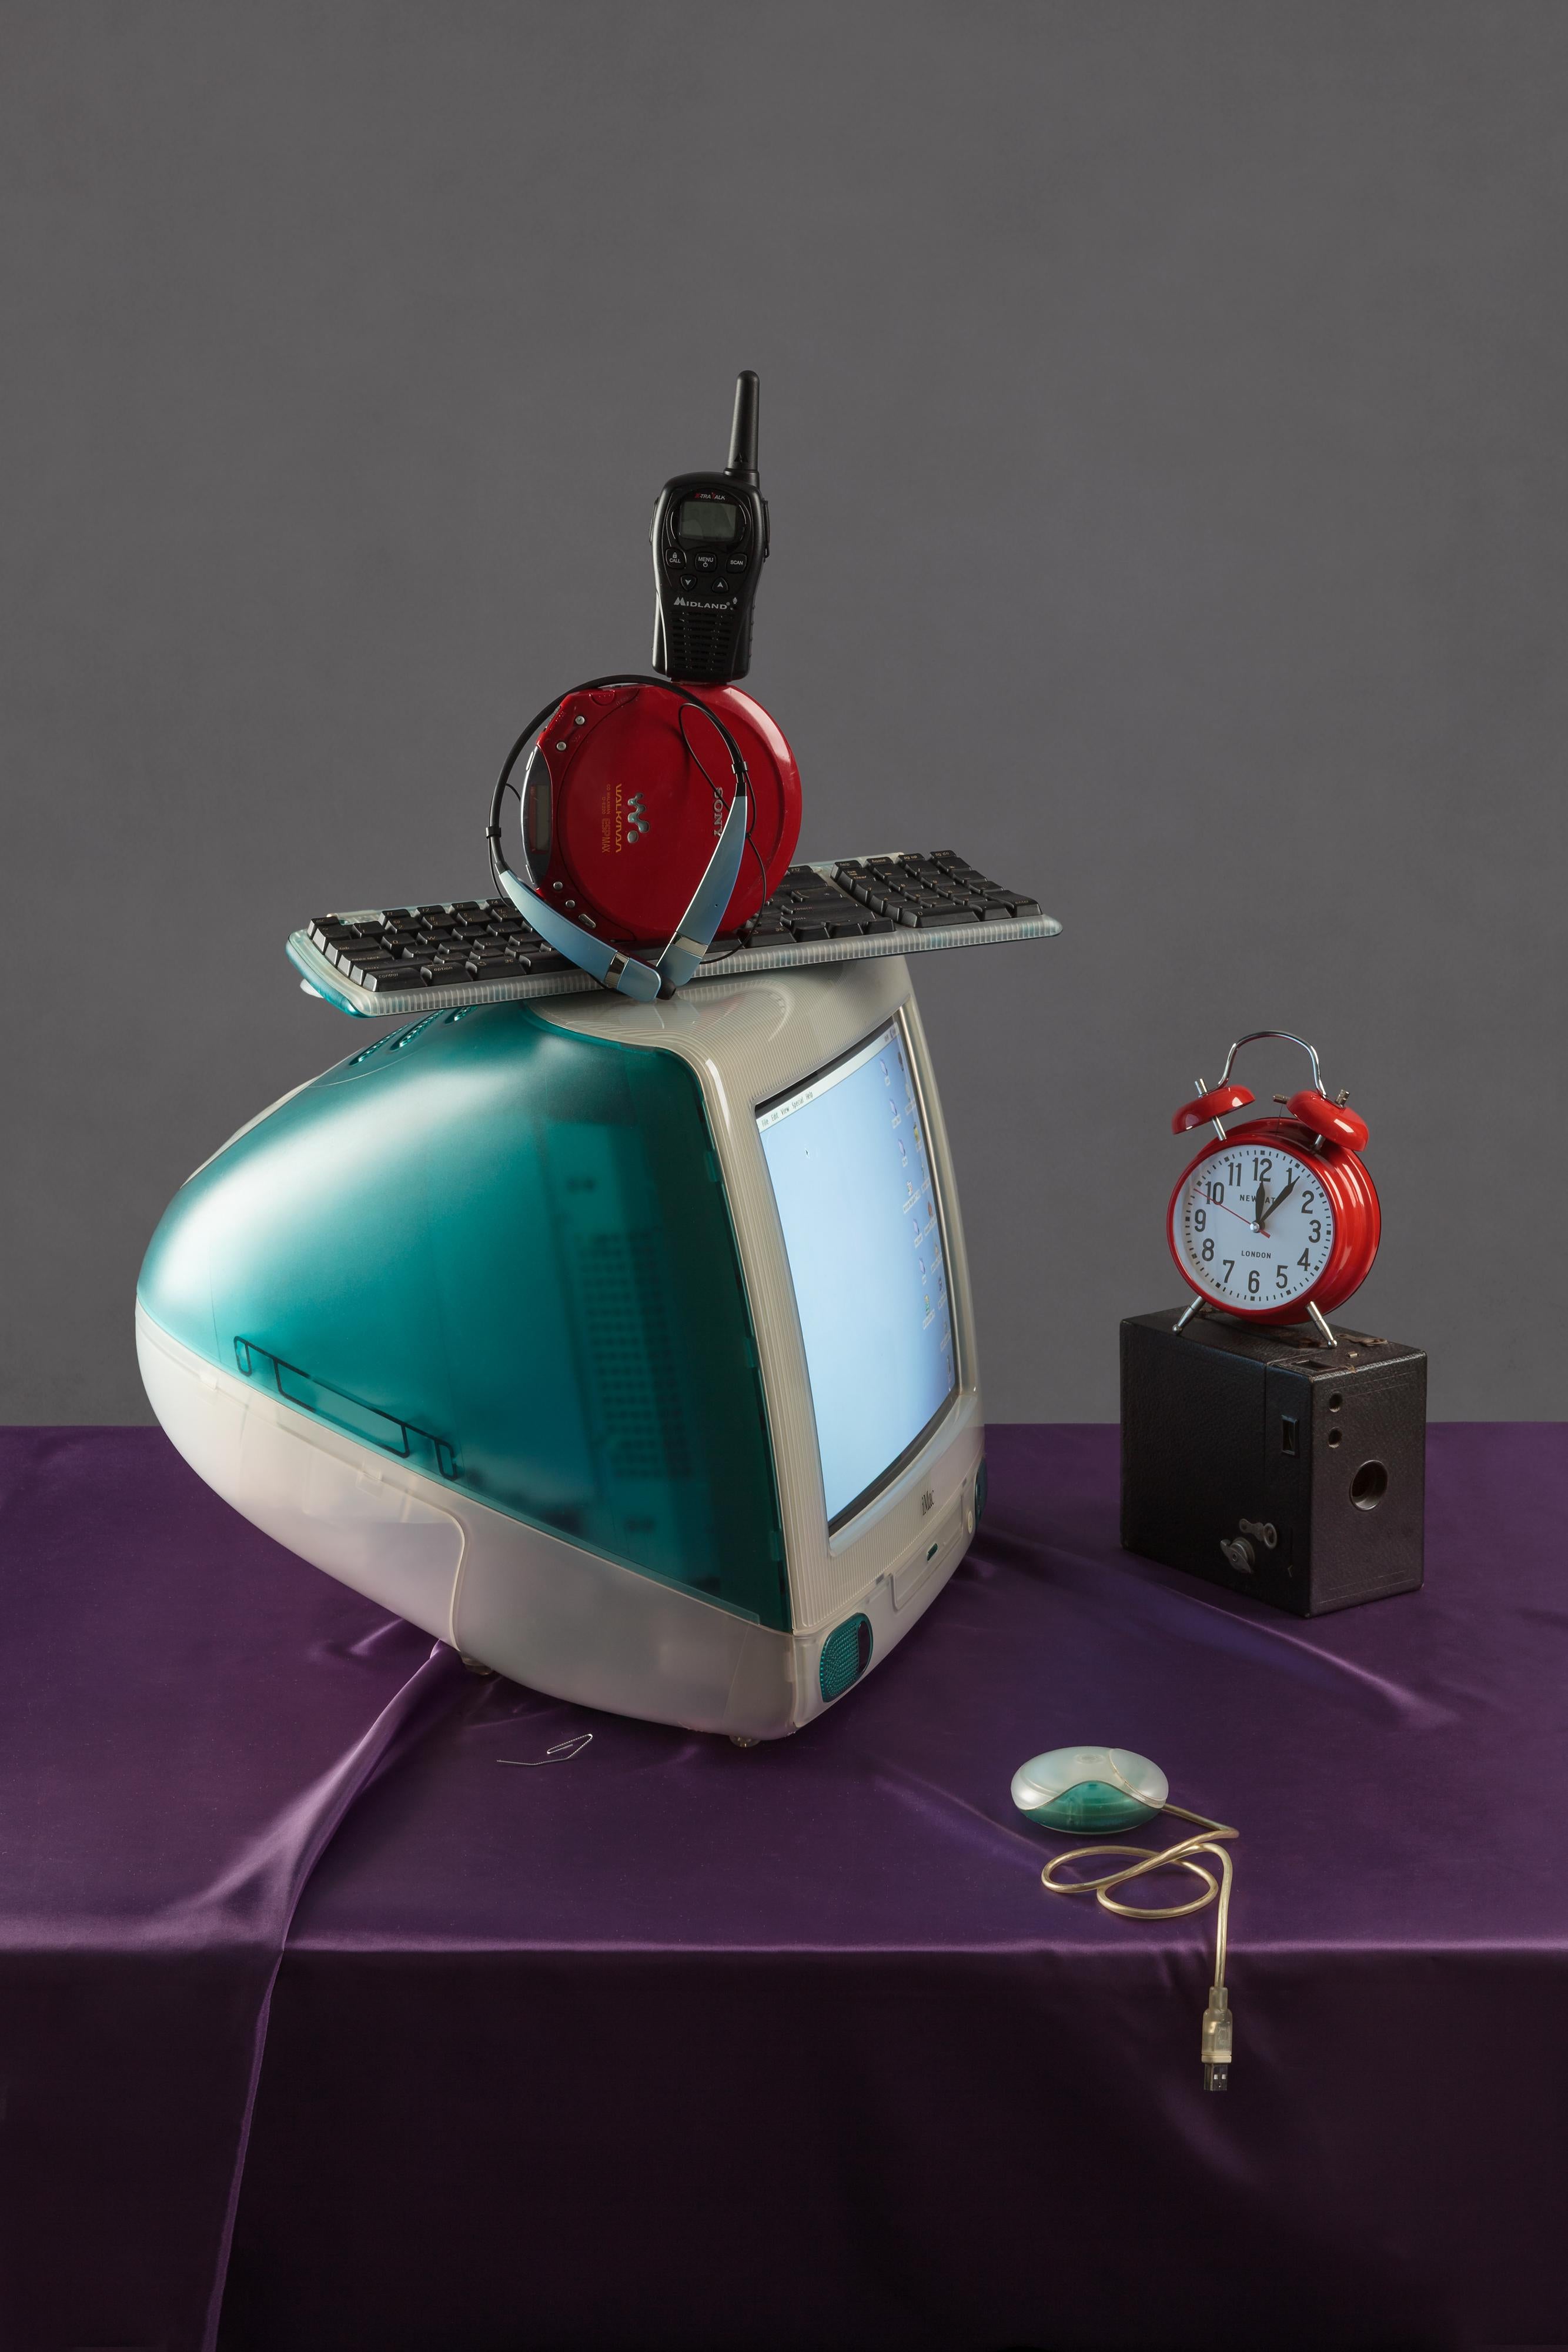 Jeanette May Still-Life Photograph - "Tech Vanitas: Blue iMac" Contemporary Still-life Photograph of Vintage Tech